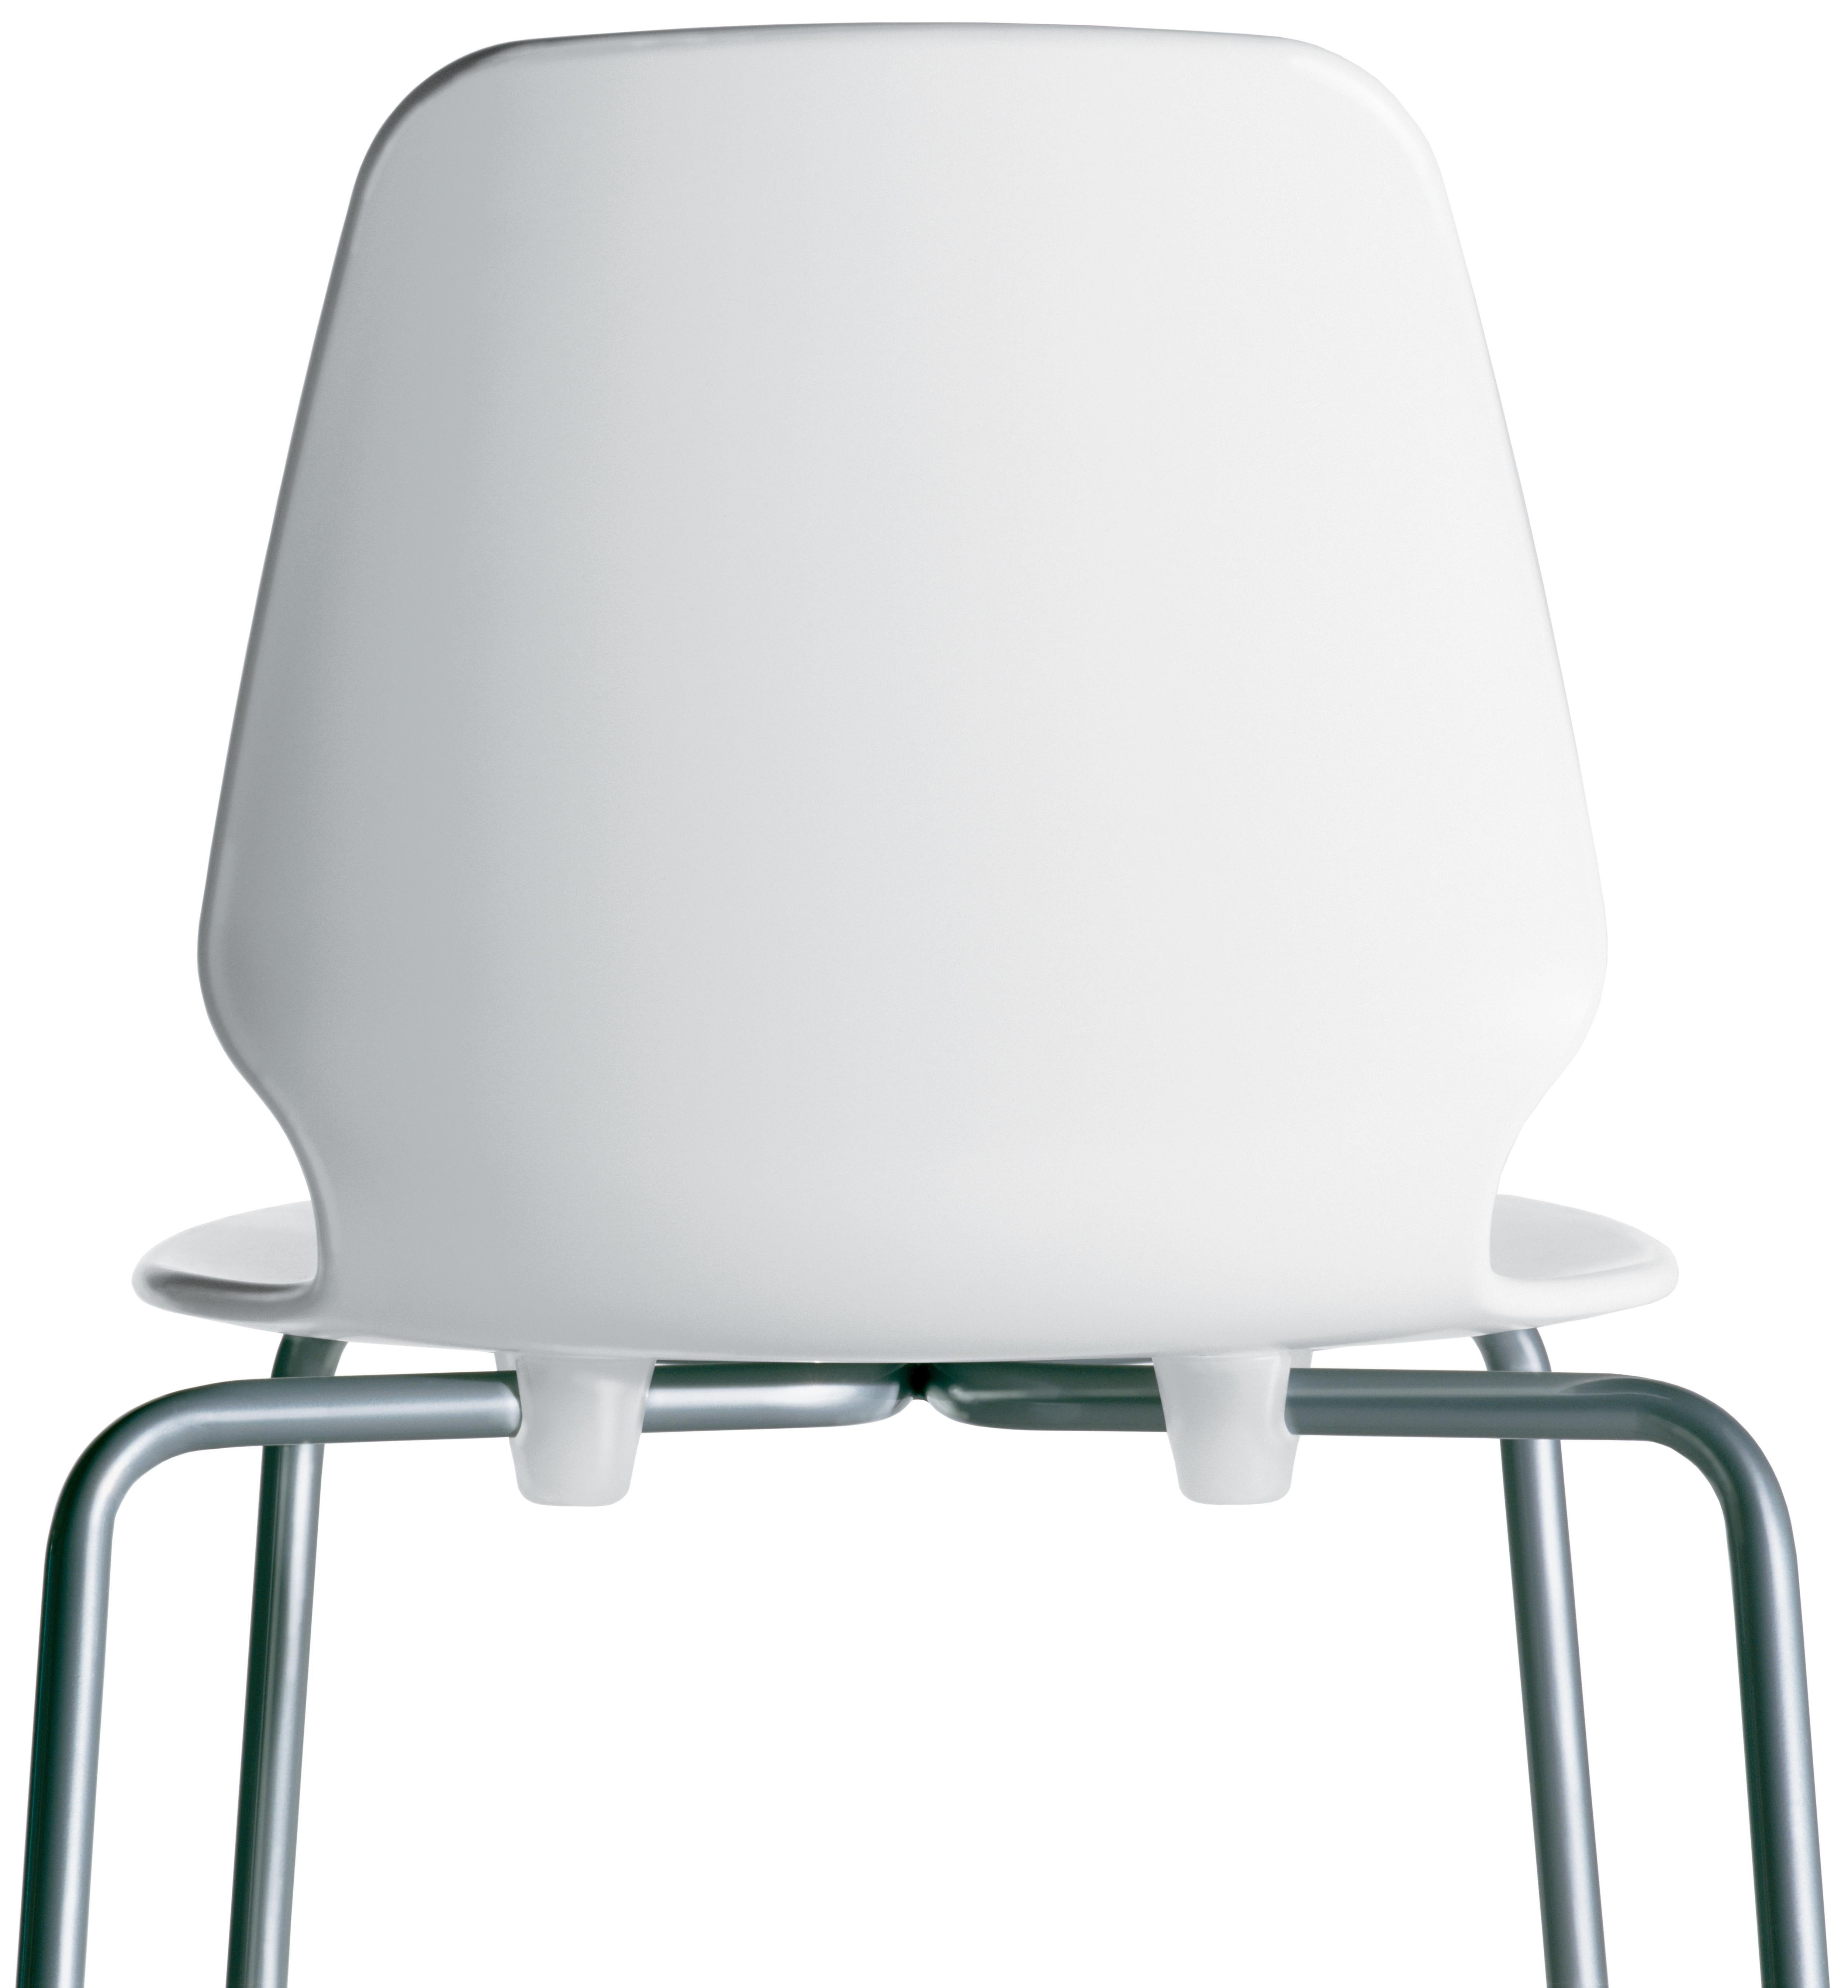 Alias 531 Selinunte Sledge Chair in White Seat and Lacquered Steel Frame For Sale 1